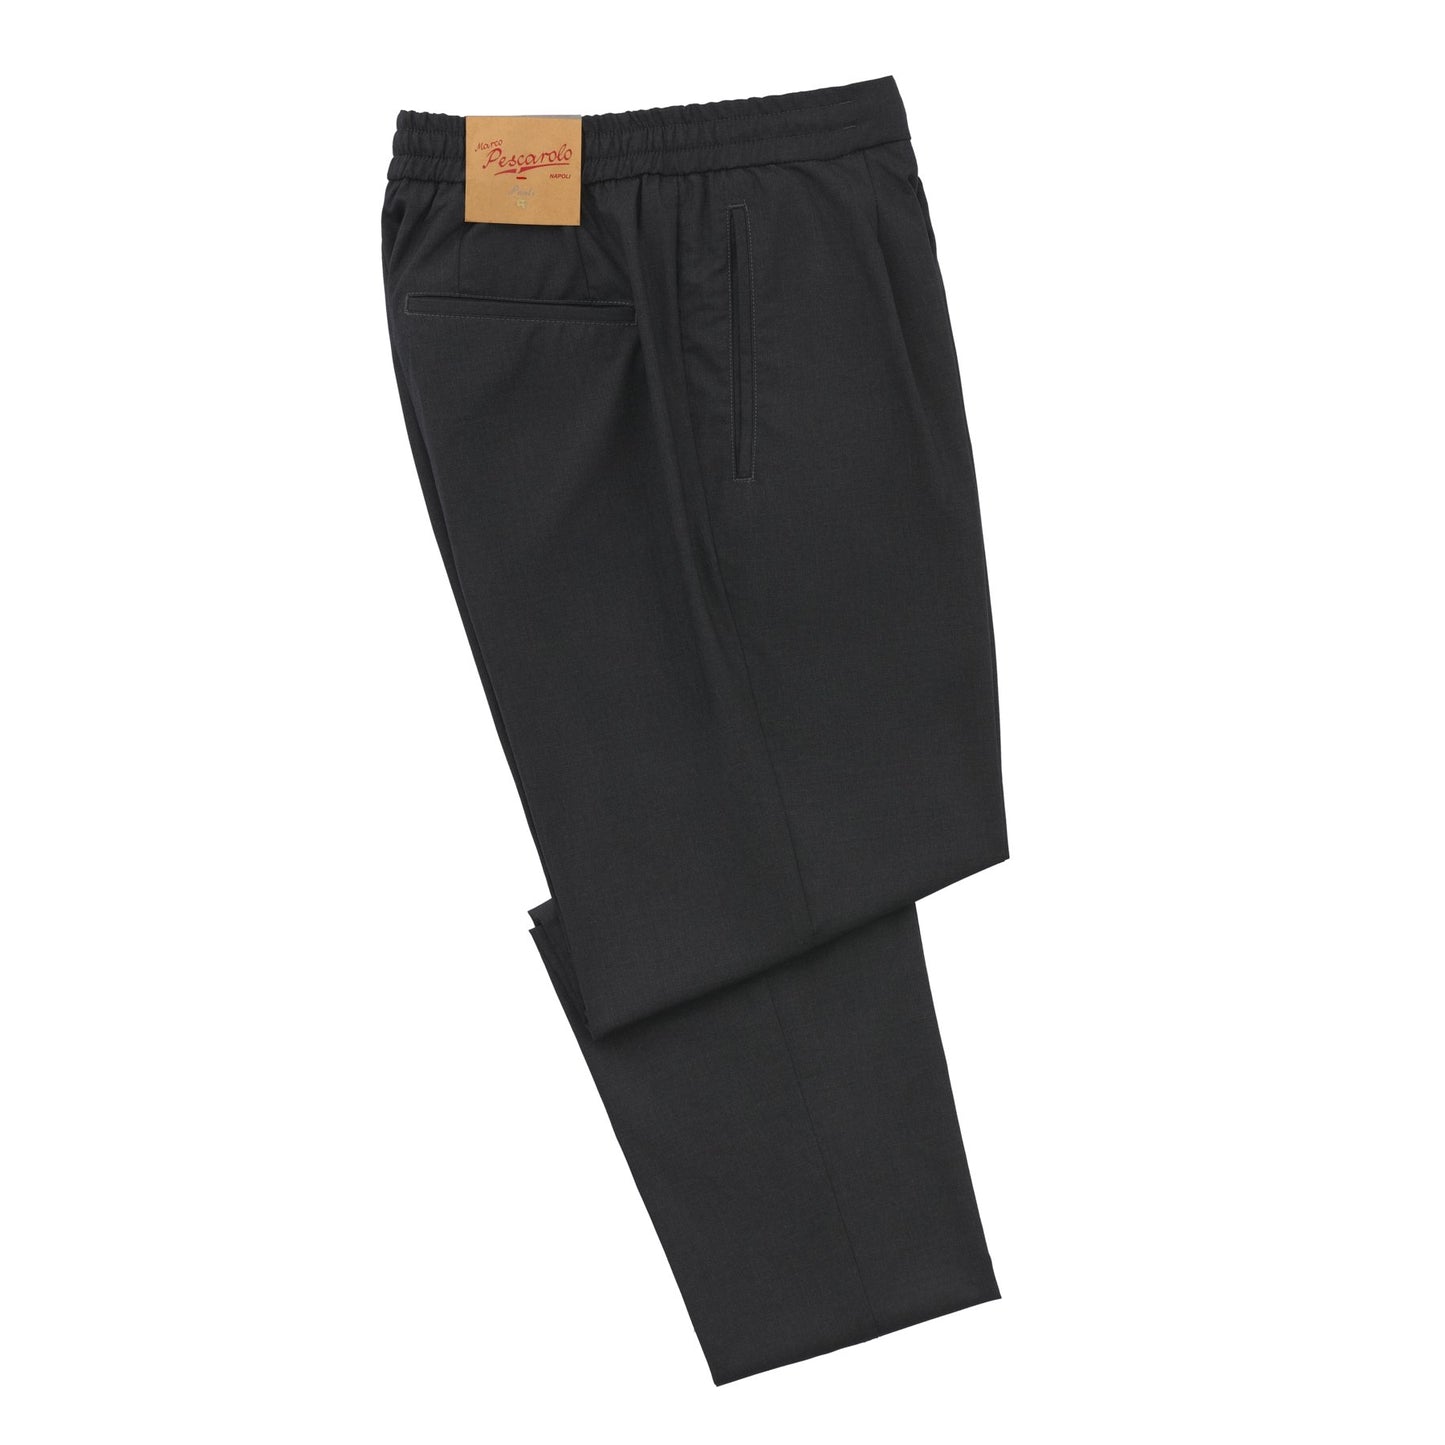 Marco Pescarolo Slim-Fit Virgin Wool Pleated Drawstring Anthracite Trousers - SARTALE